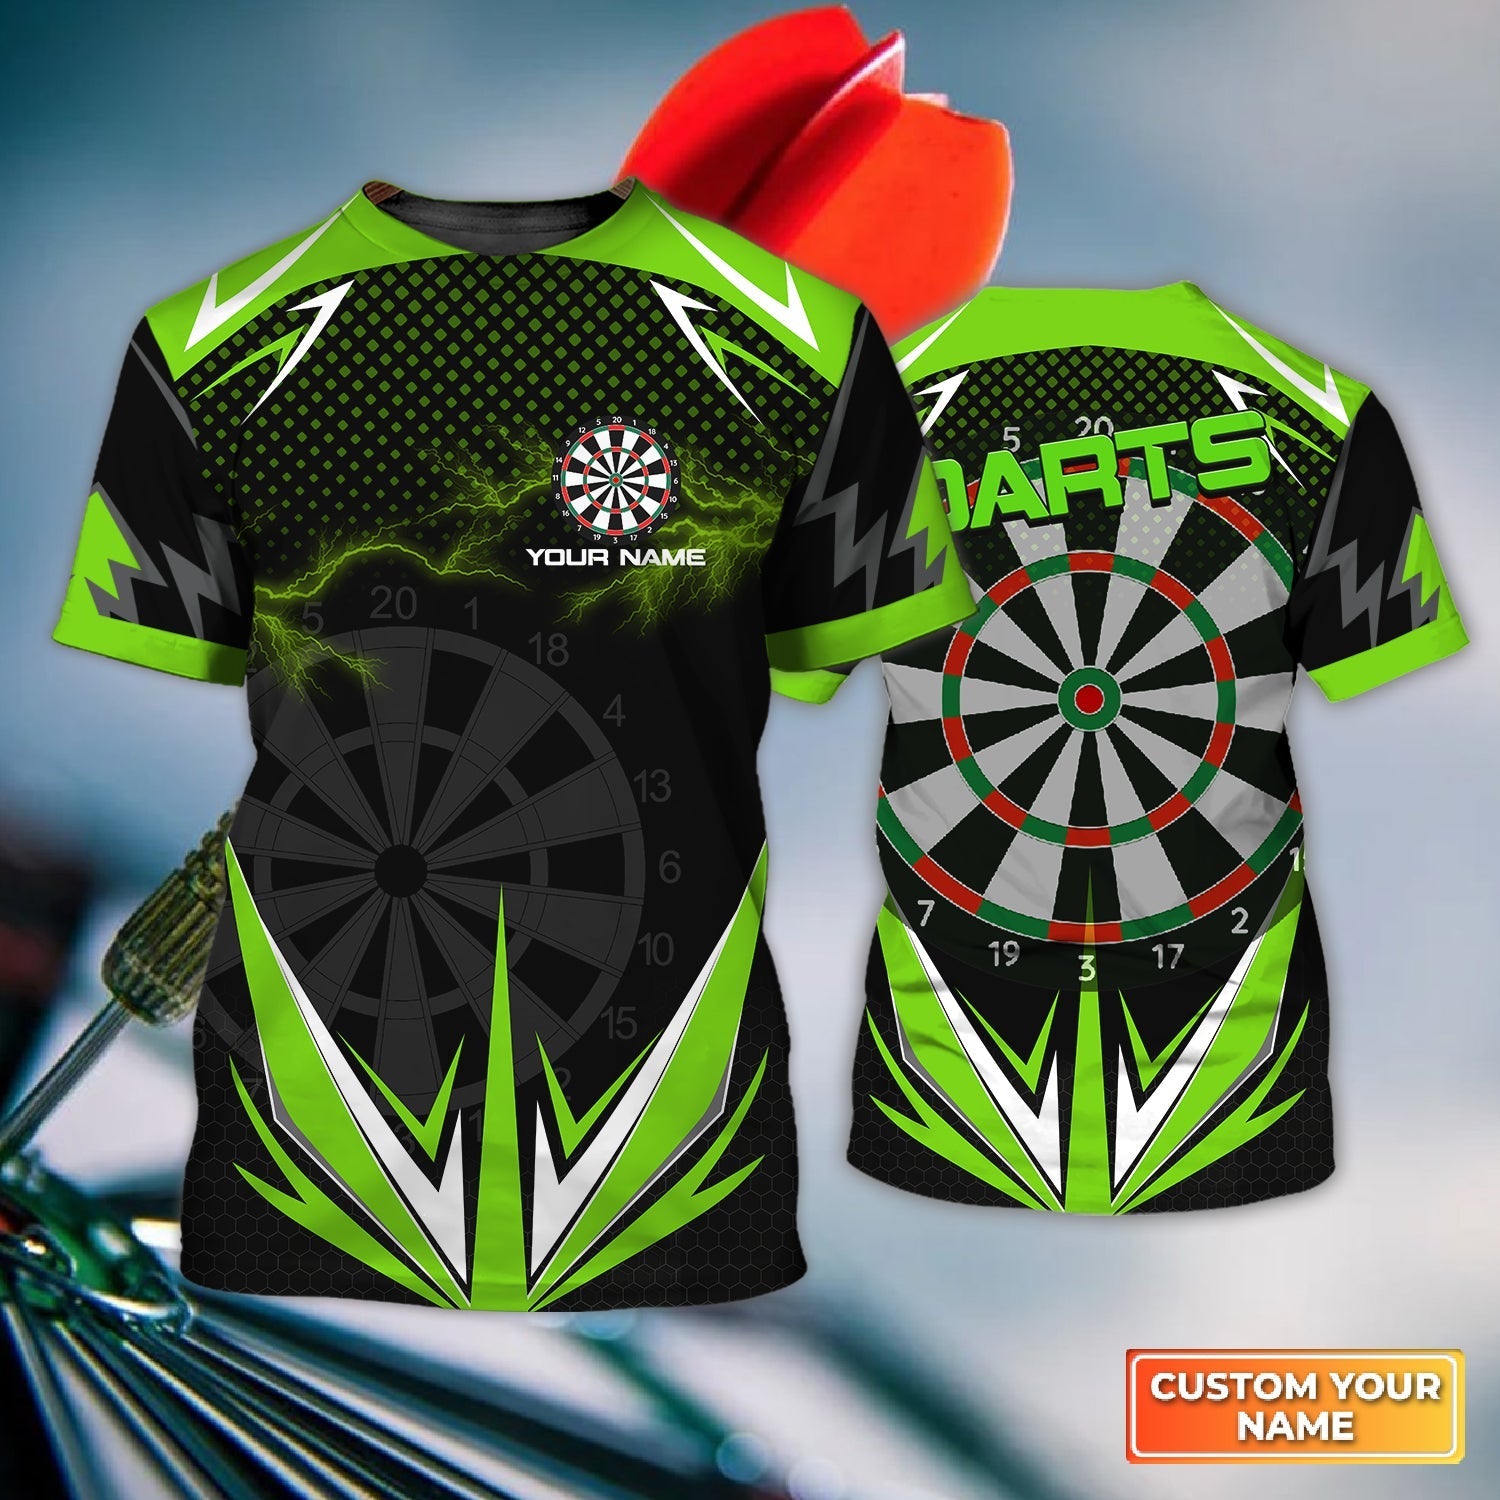 Darts 3D all over printed shirt for Men, Personalized Name 3D Tshirt, gift for darts lovers – DT002